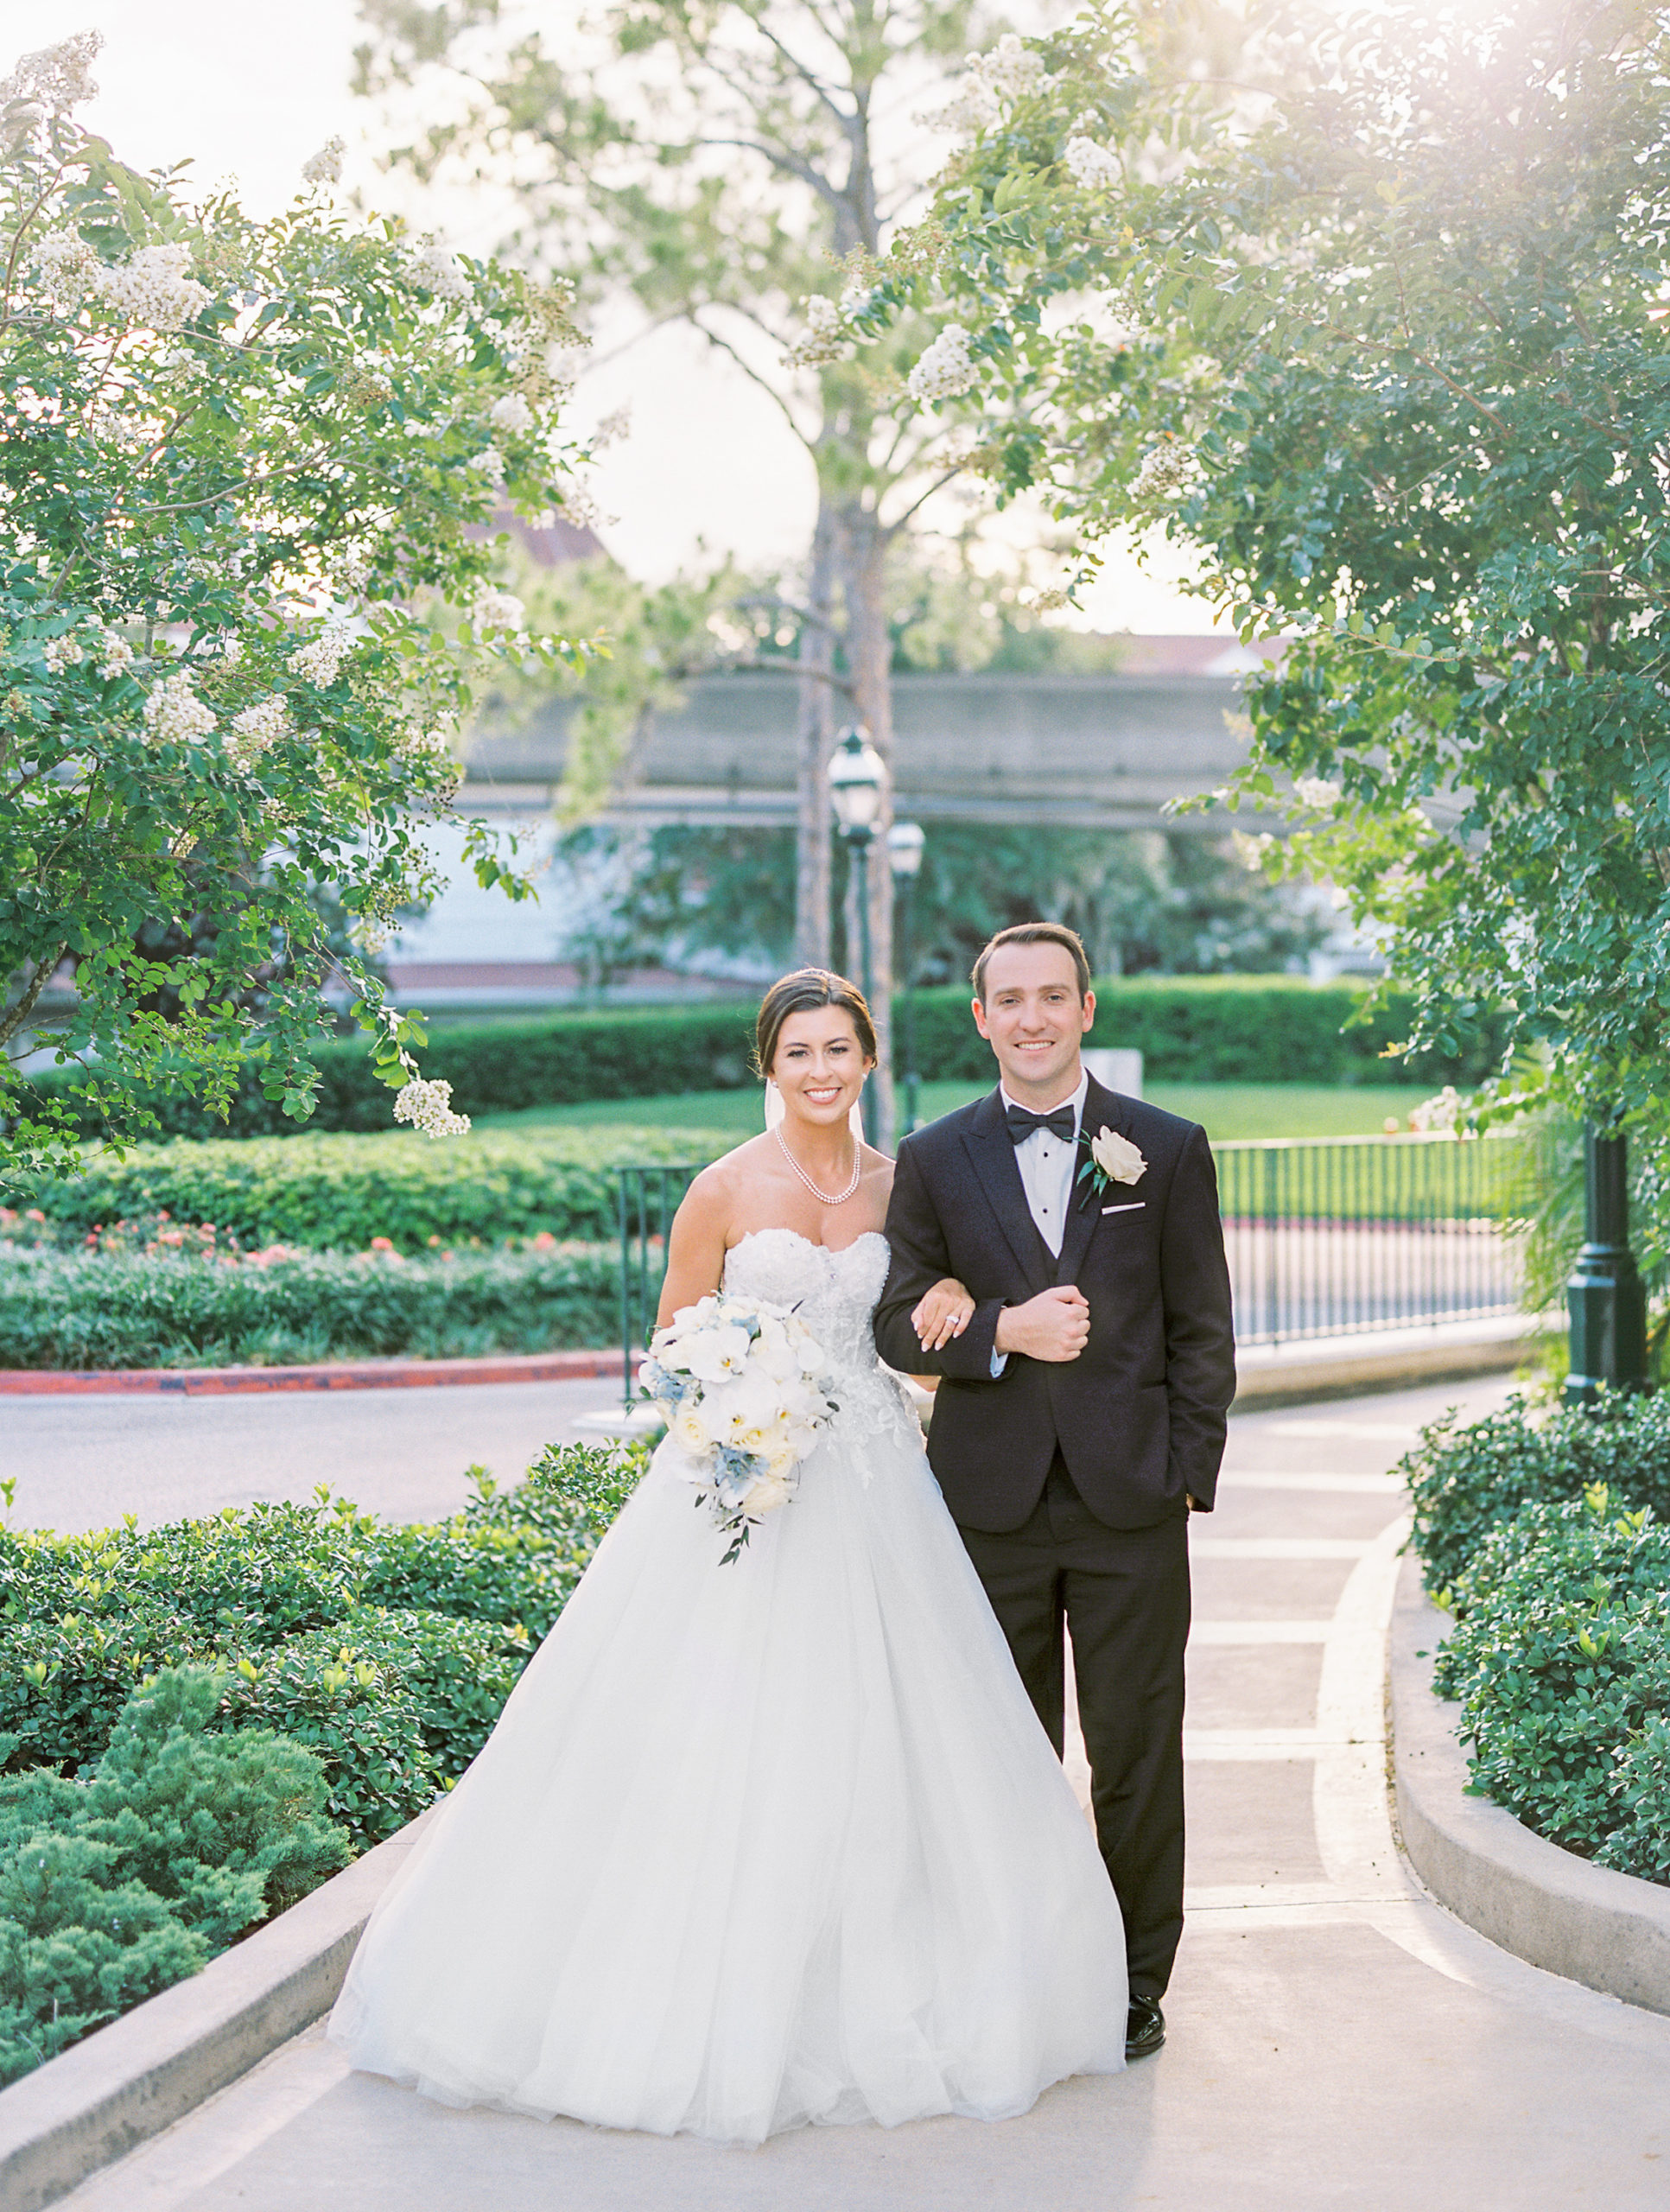 Bride and groom interlock arms and smile on pathway with tree in background at Romantic and Timeless Grand Floridian Wedding 